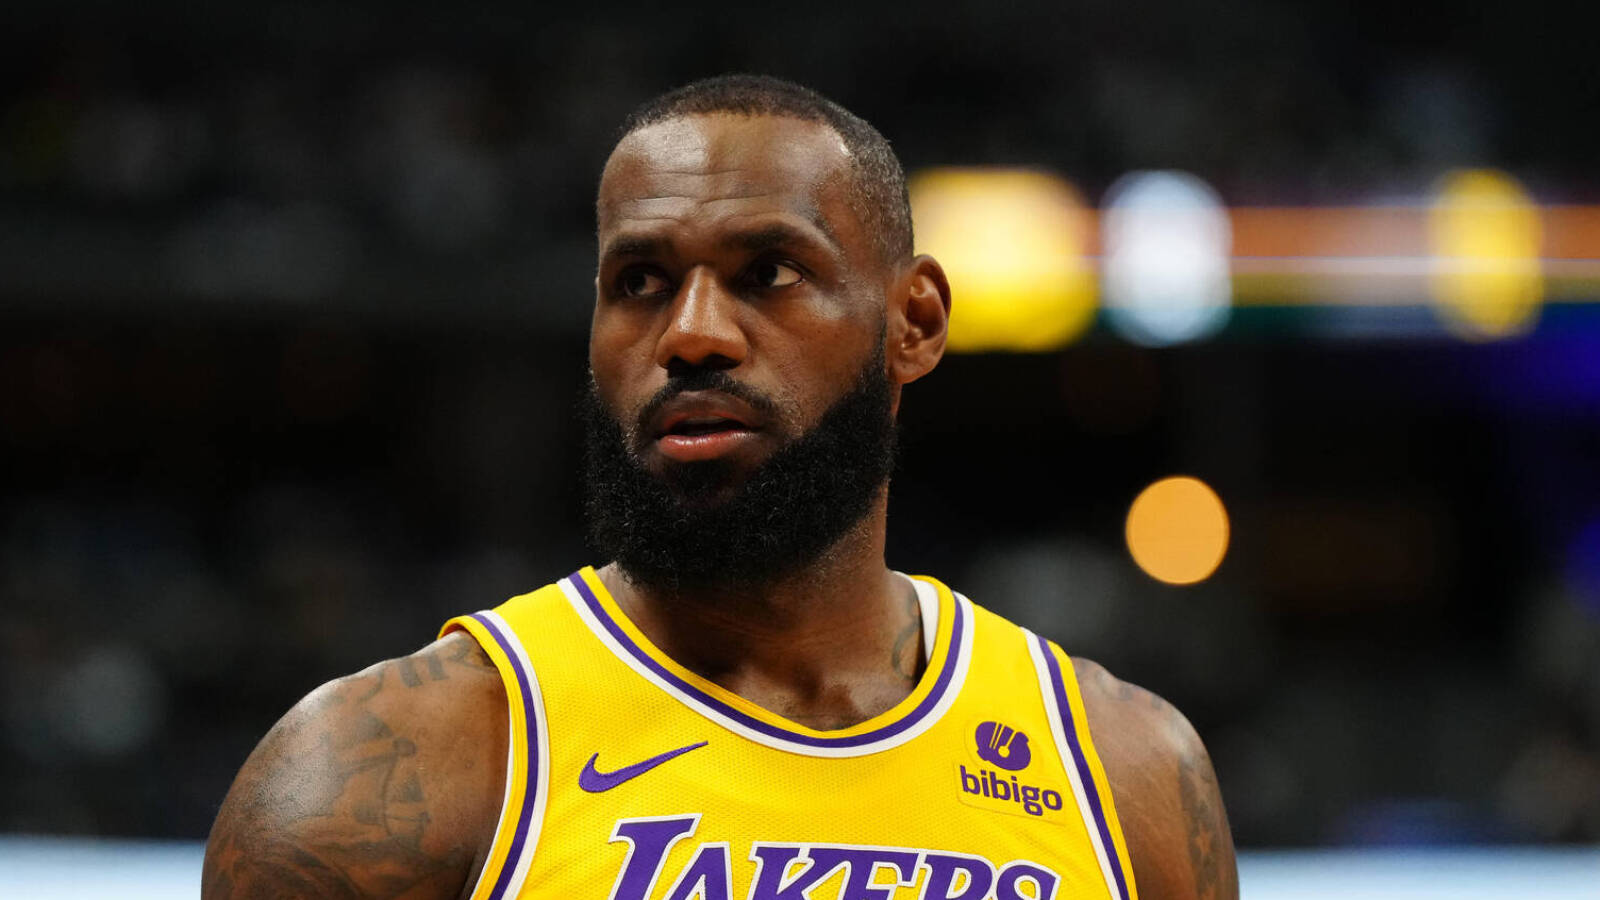 Should LeBron James be the player-coach for the Lakers?